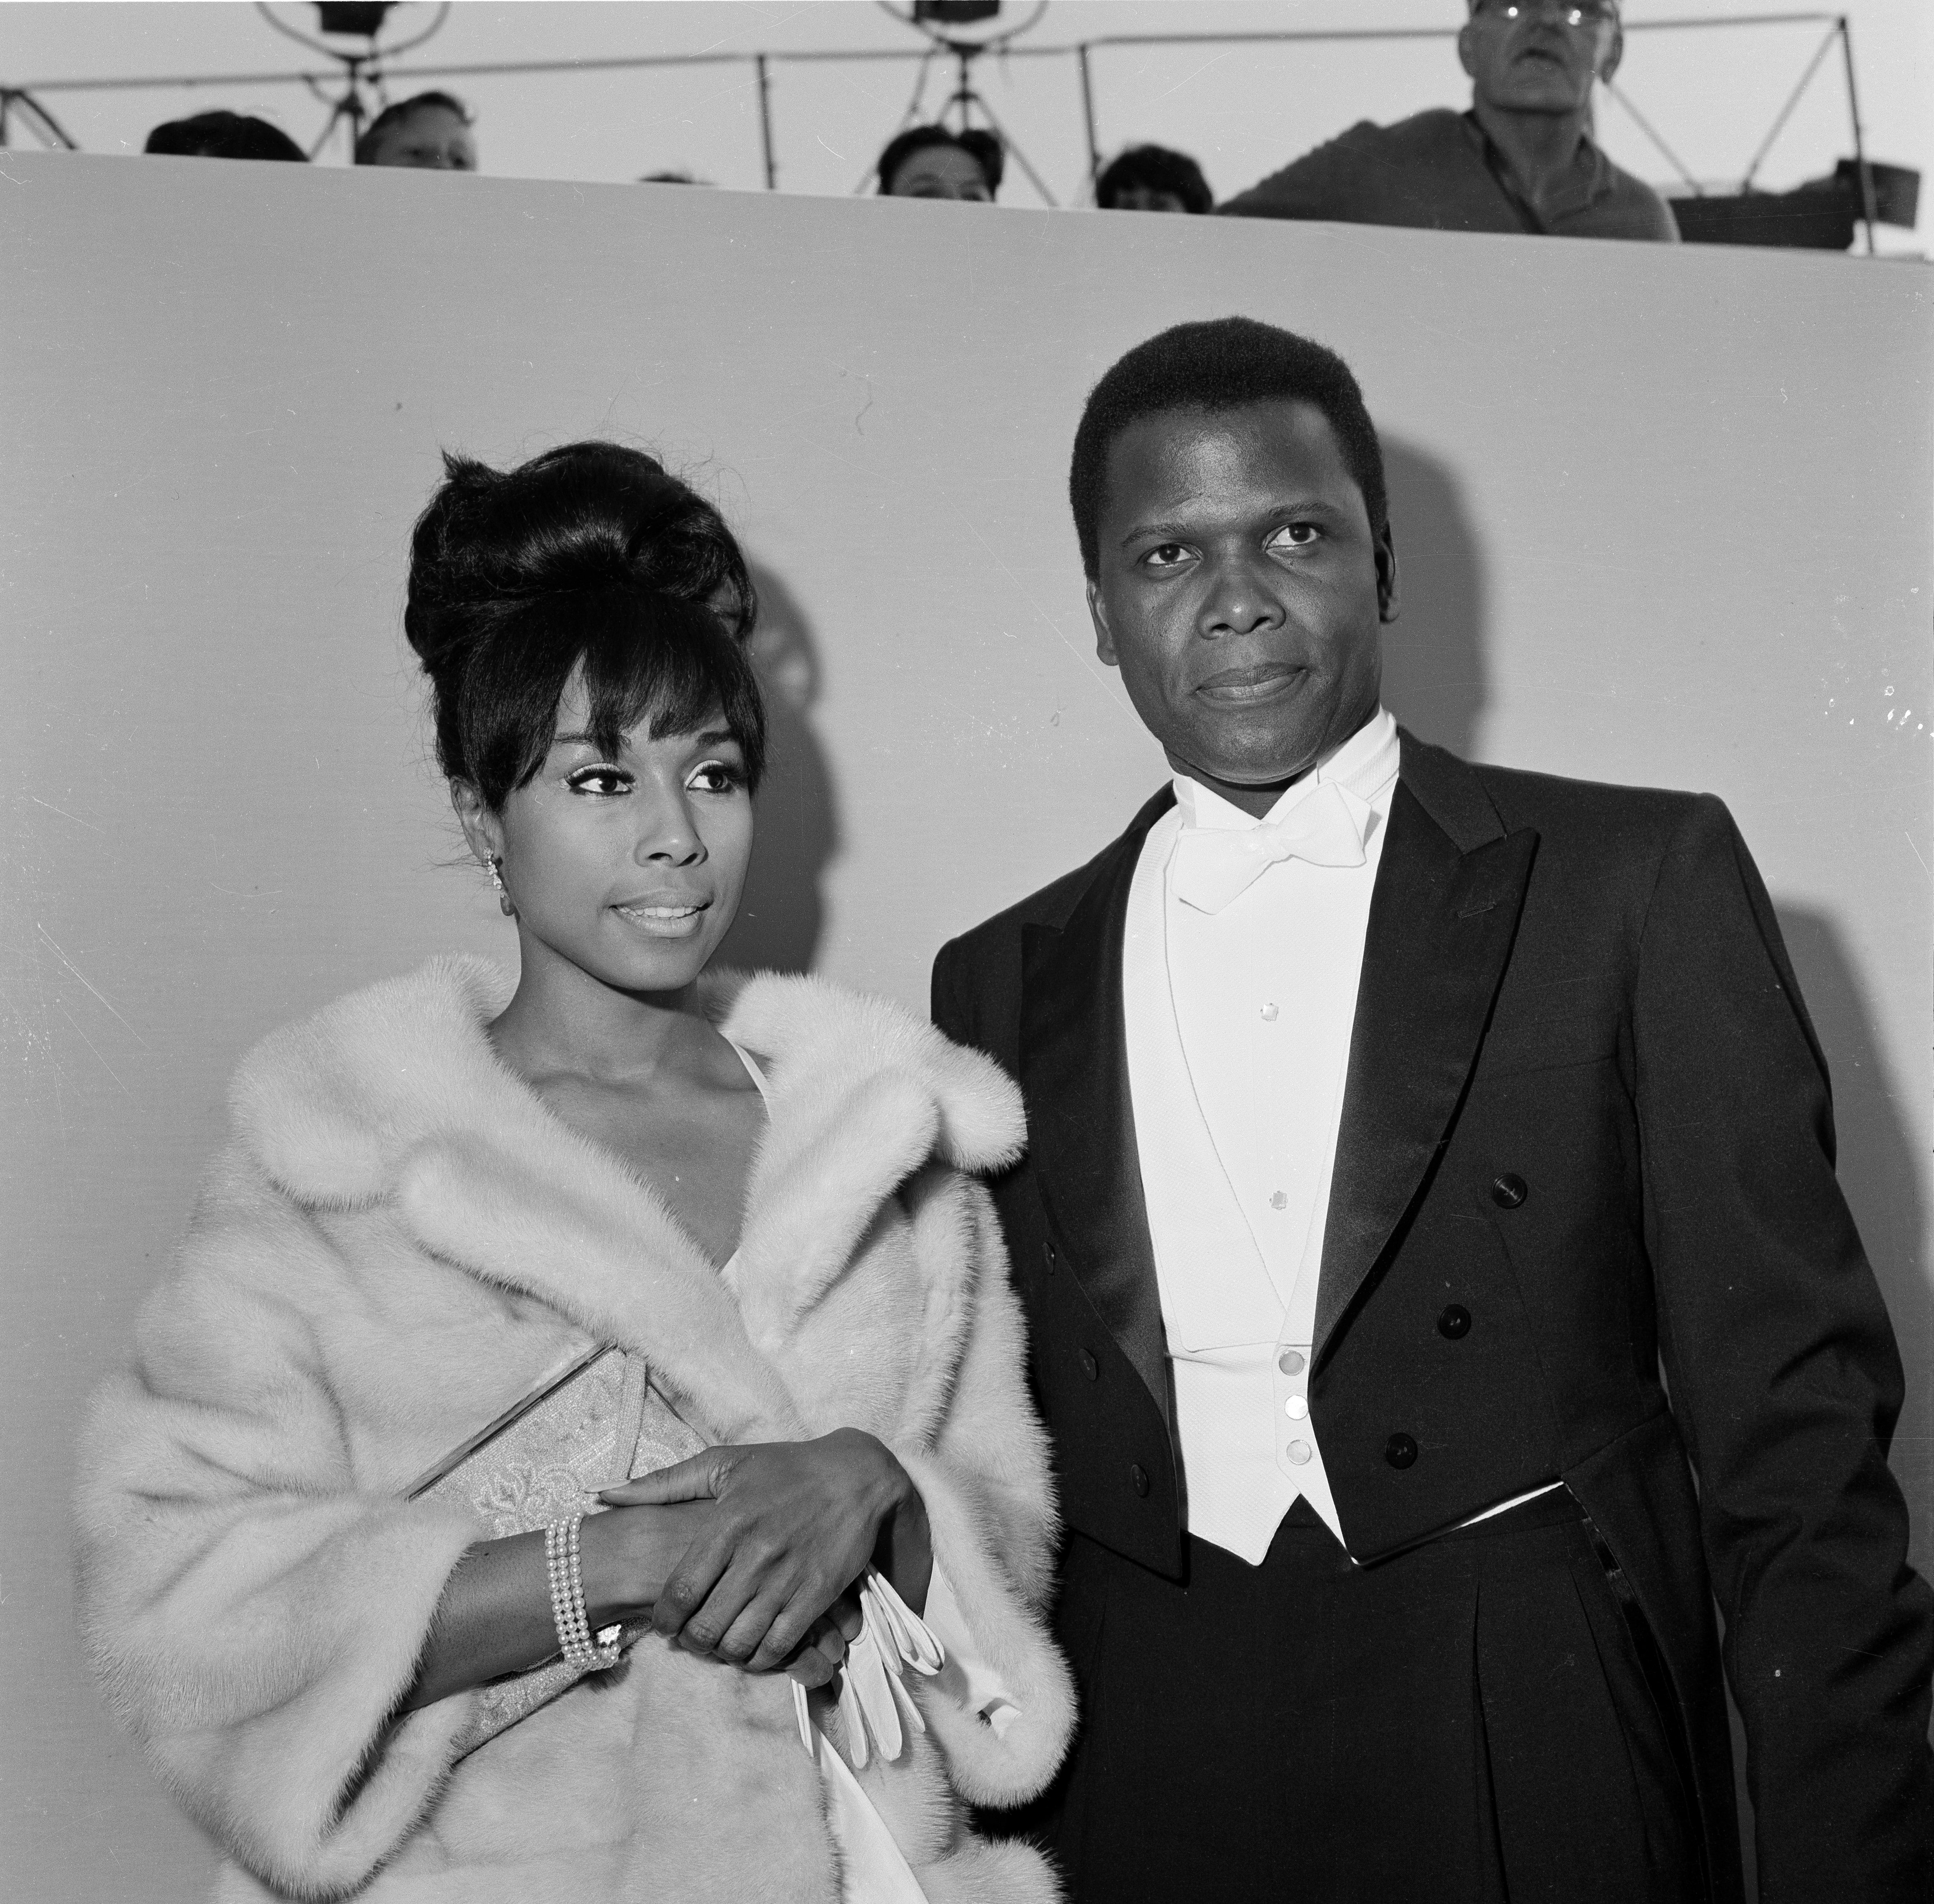 Actor Sidney Poitier with actress Diahann Carroll attend The 36th Academy Awards in Santa Monica, California, 1964. | Photo: Getty Images